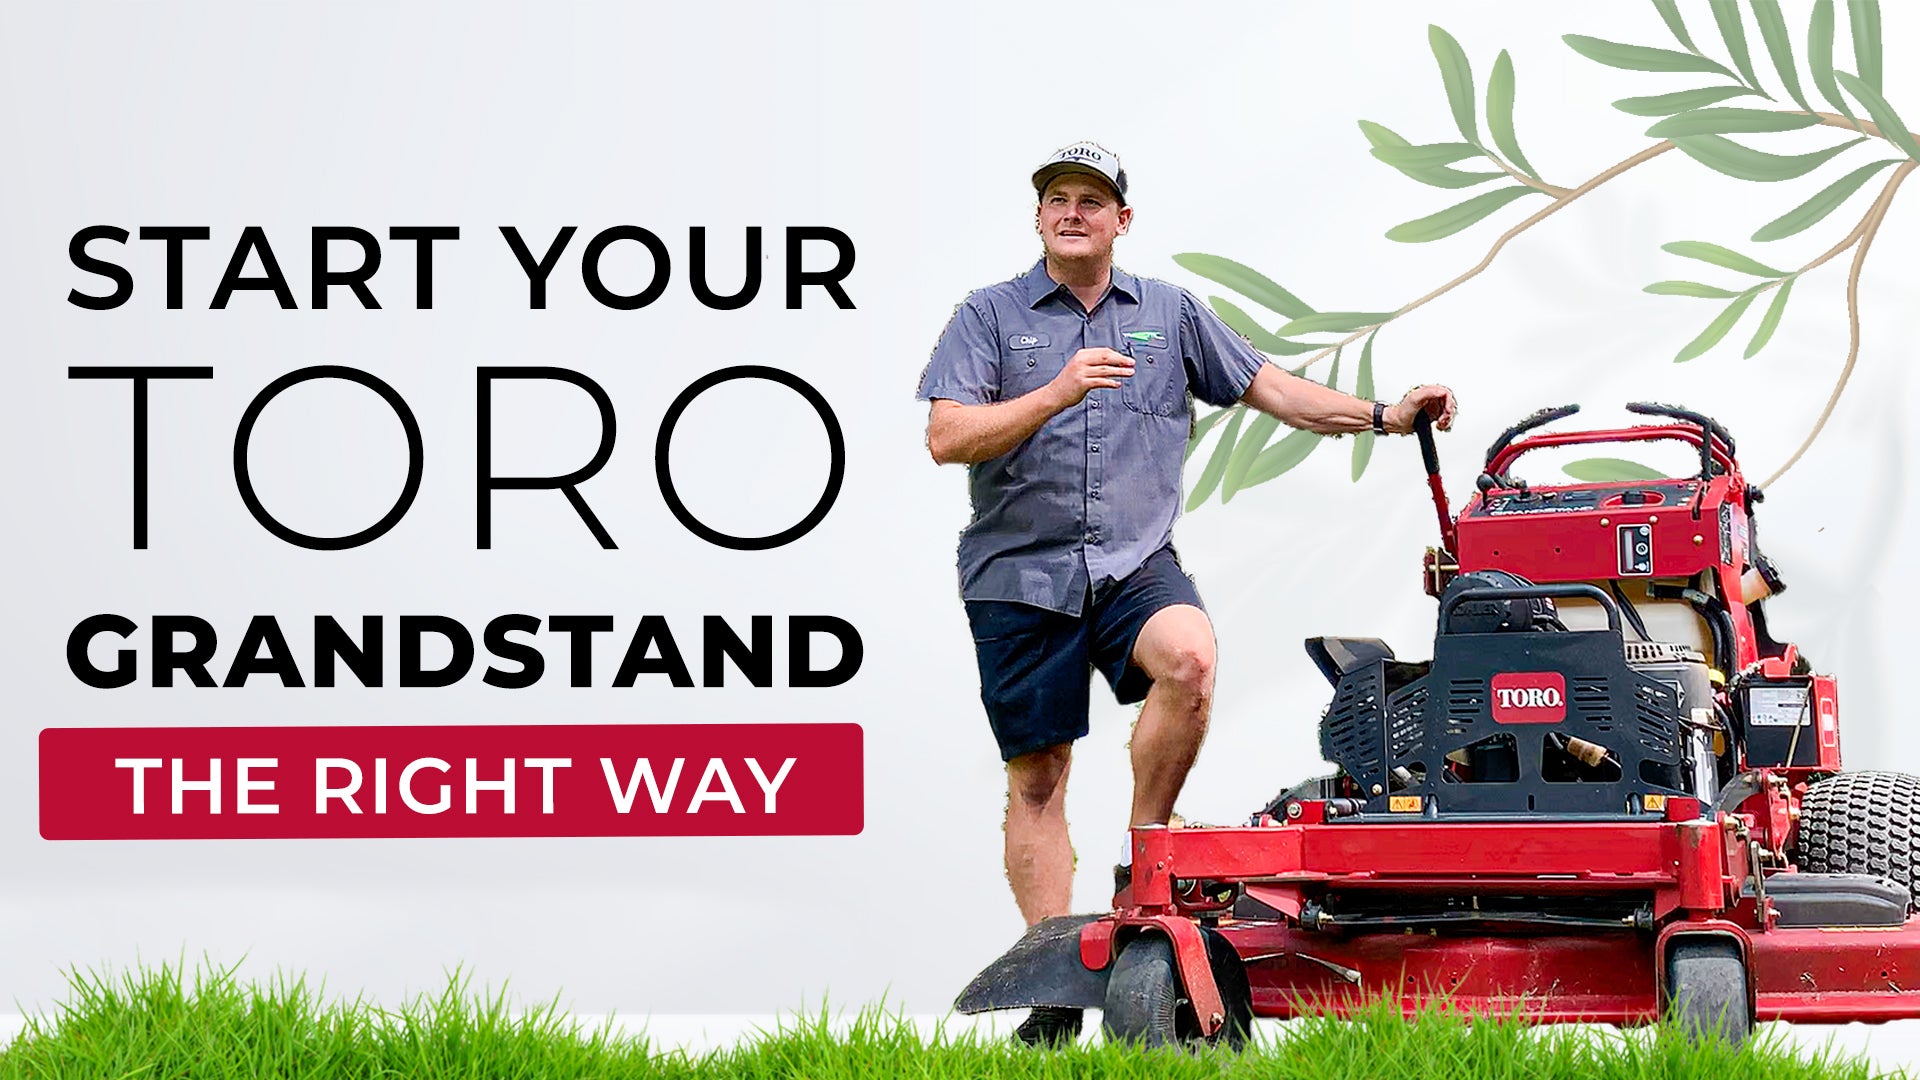 Get your Toro GrandStand up and running fast! Our step-by-step video shows you how in under one minute.